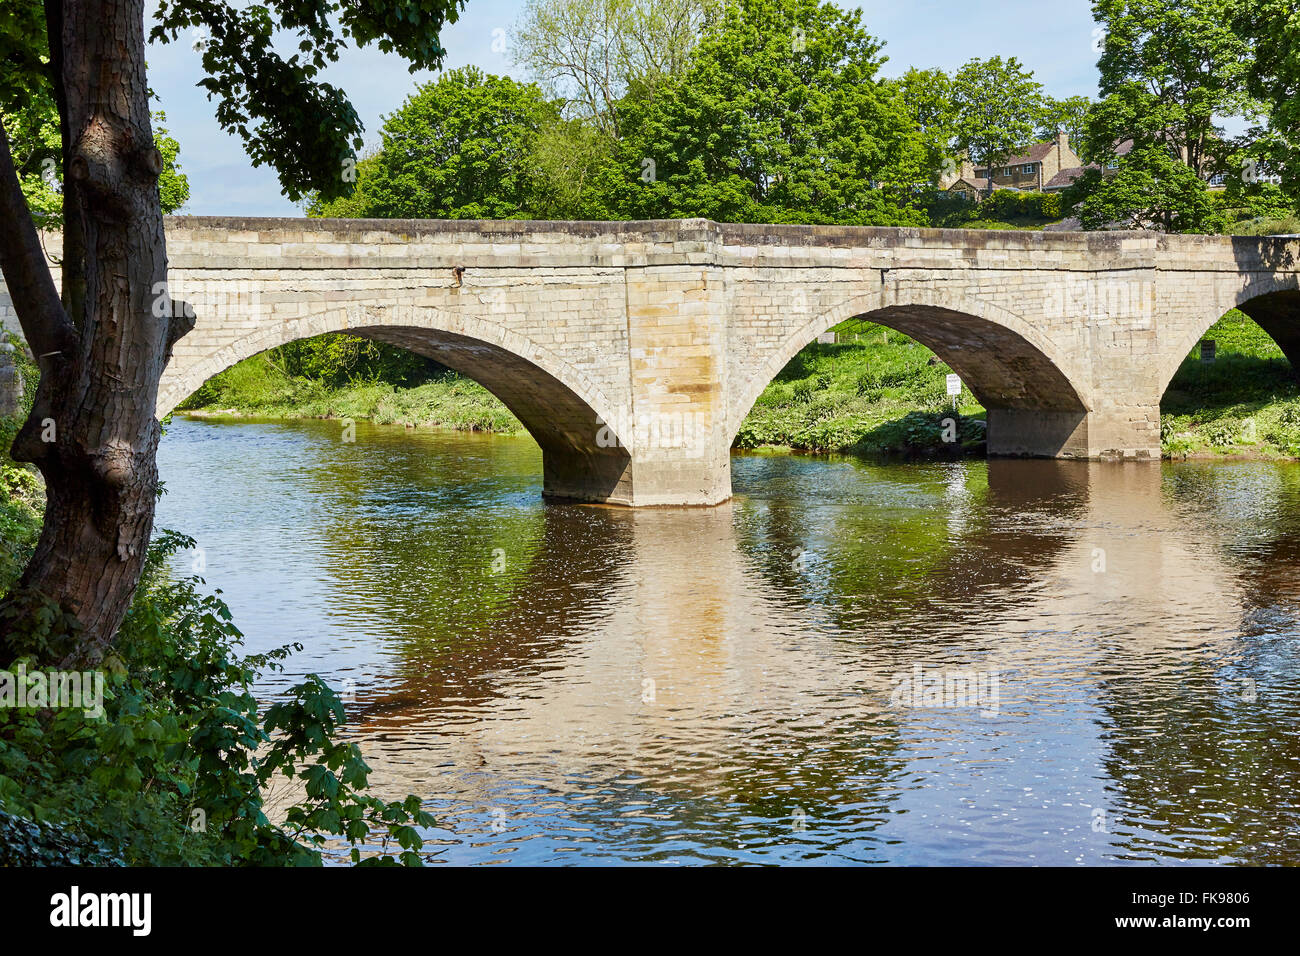 A view of Thorp Arch Bridge over the River Wharfe in Boston Spa, West Yorkshire, England, UK. Stock Photo